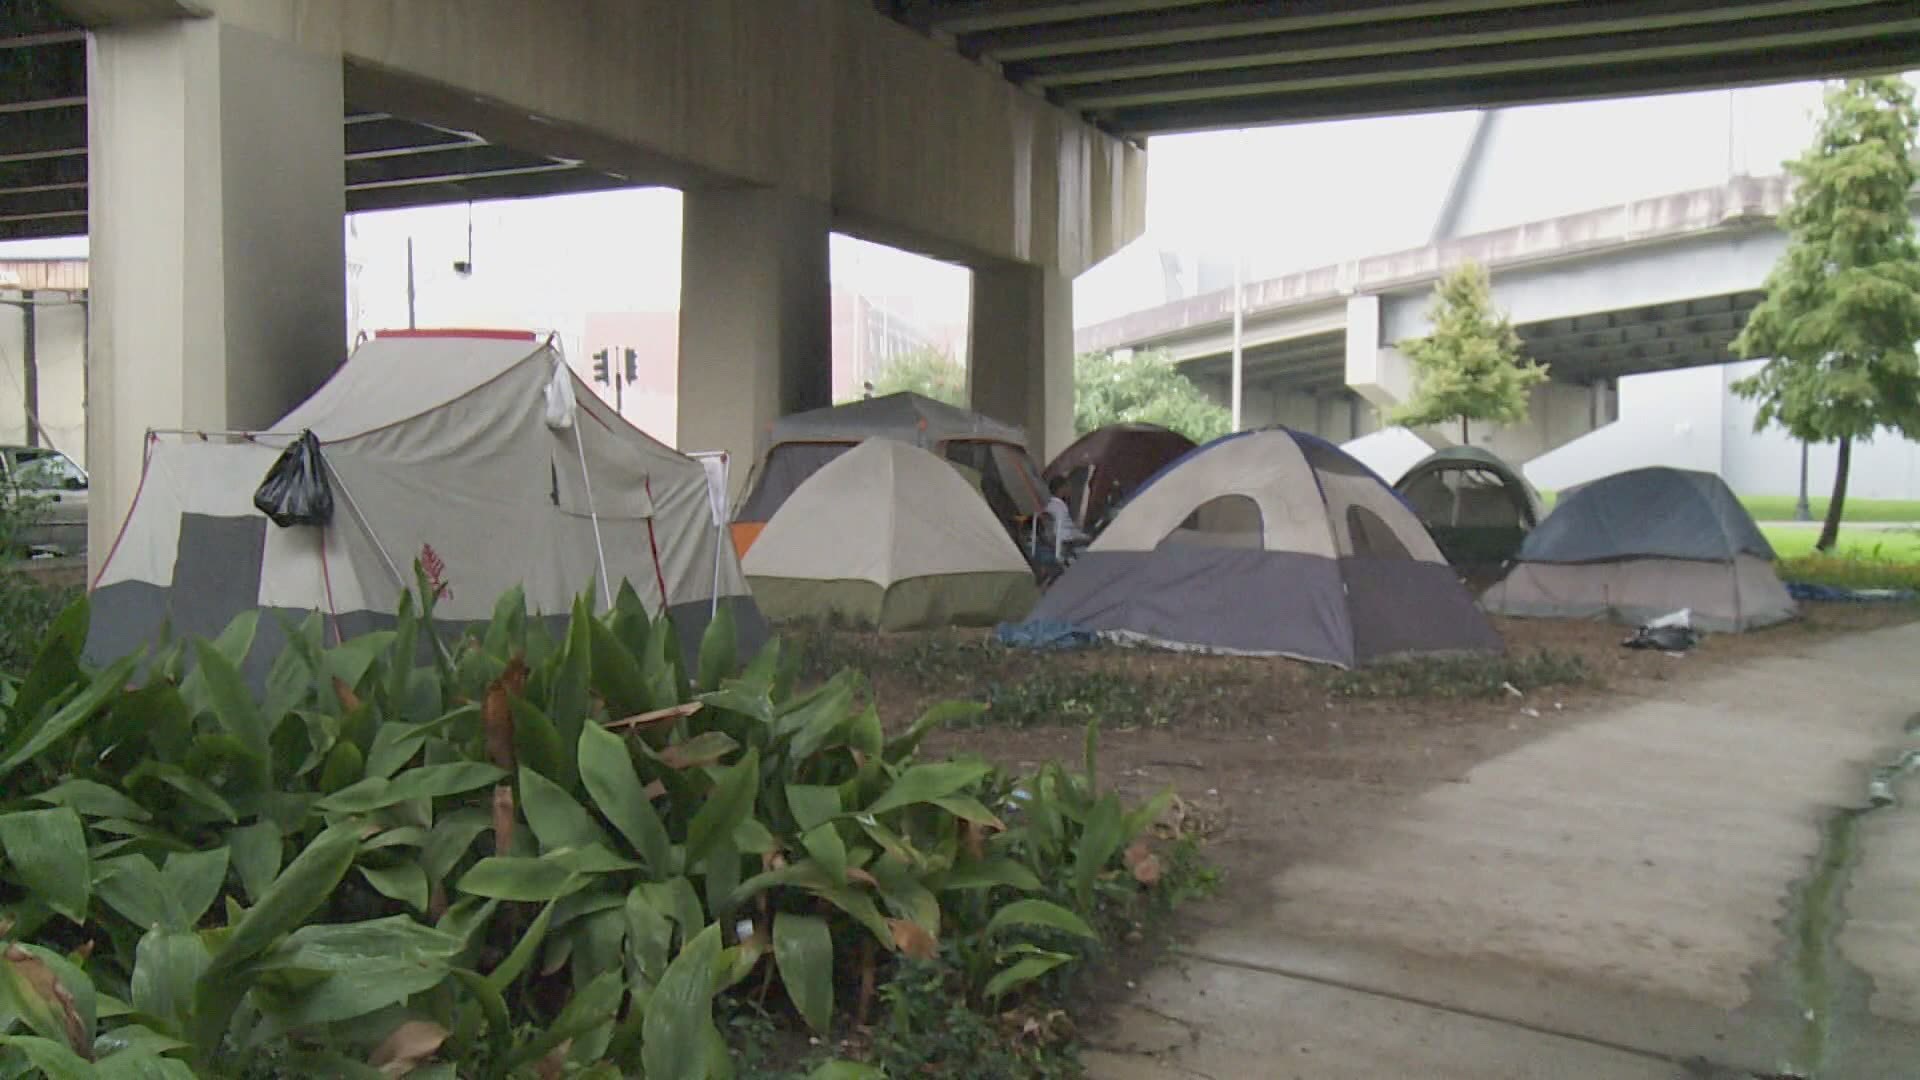 Officials are saying covid's Delta variant could cause a rise in homelessness.